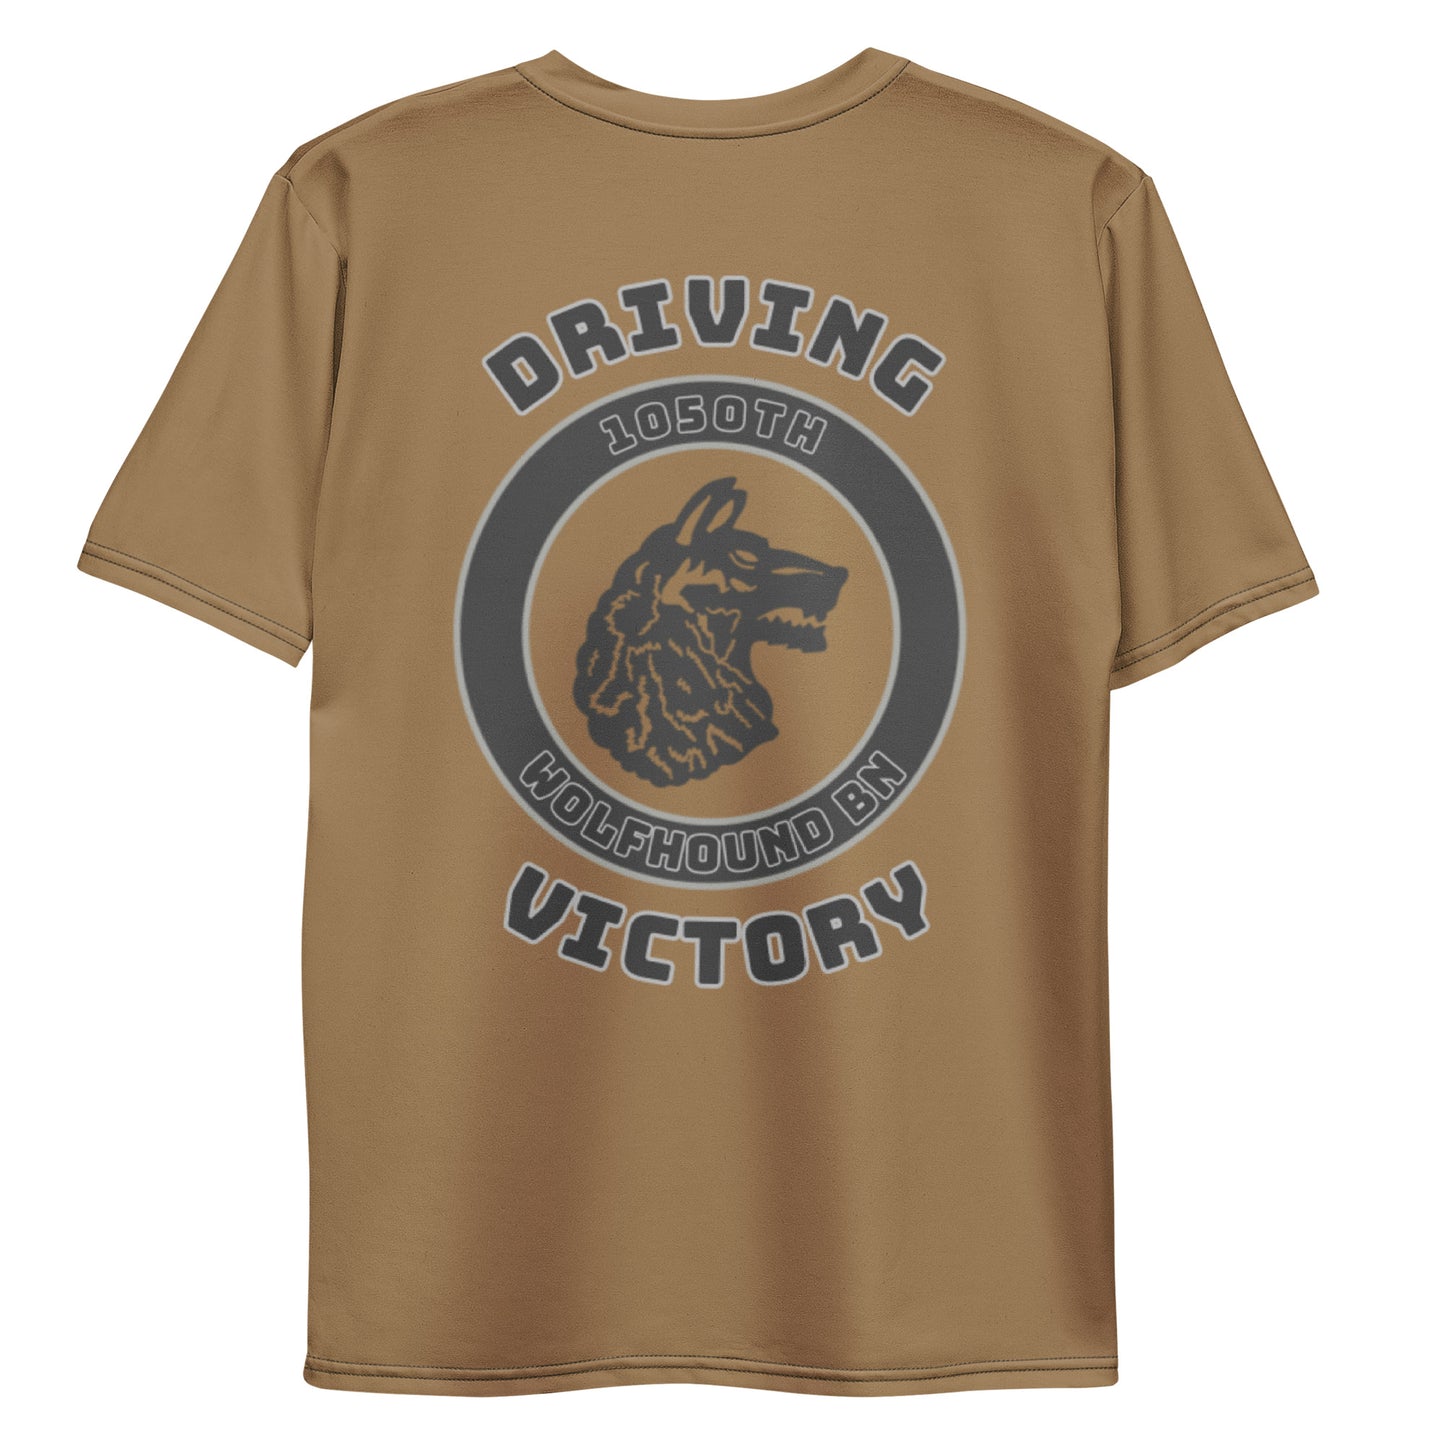 WOLFHOUND 1050TH Men's t-shirt - COYOTE BROWN